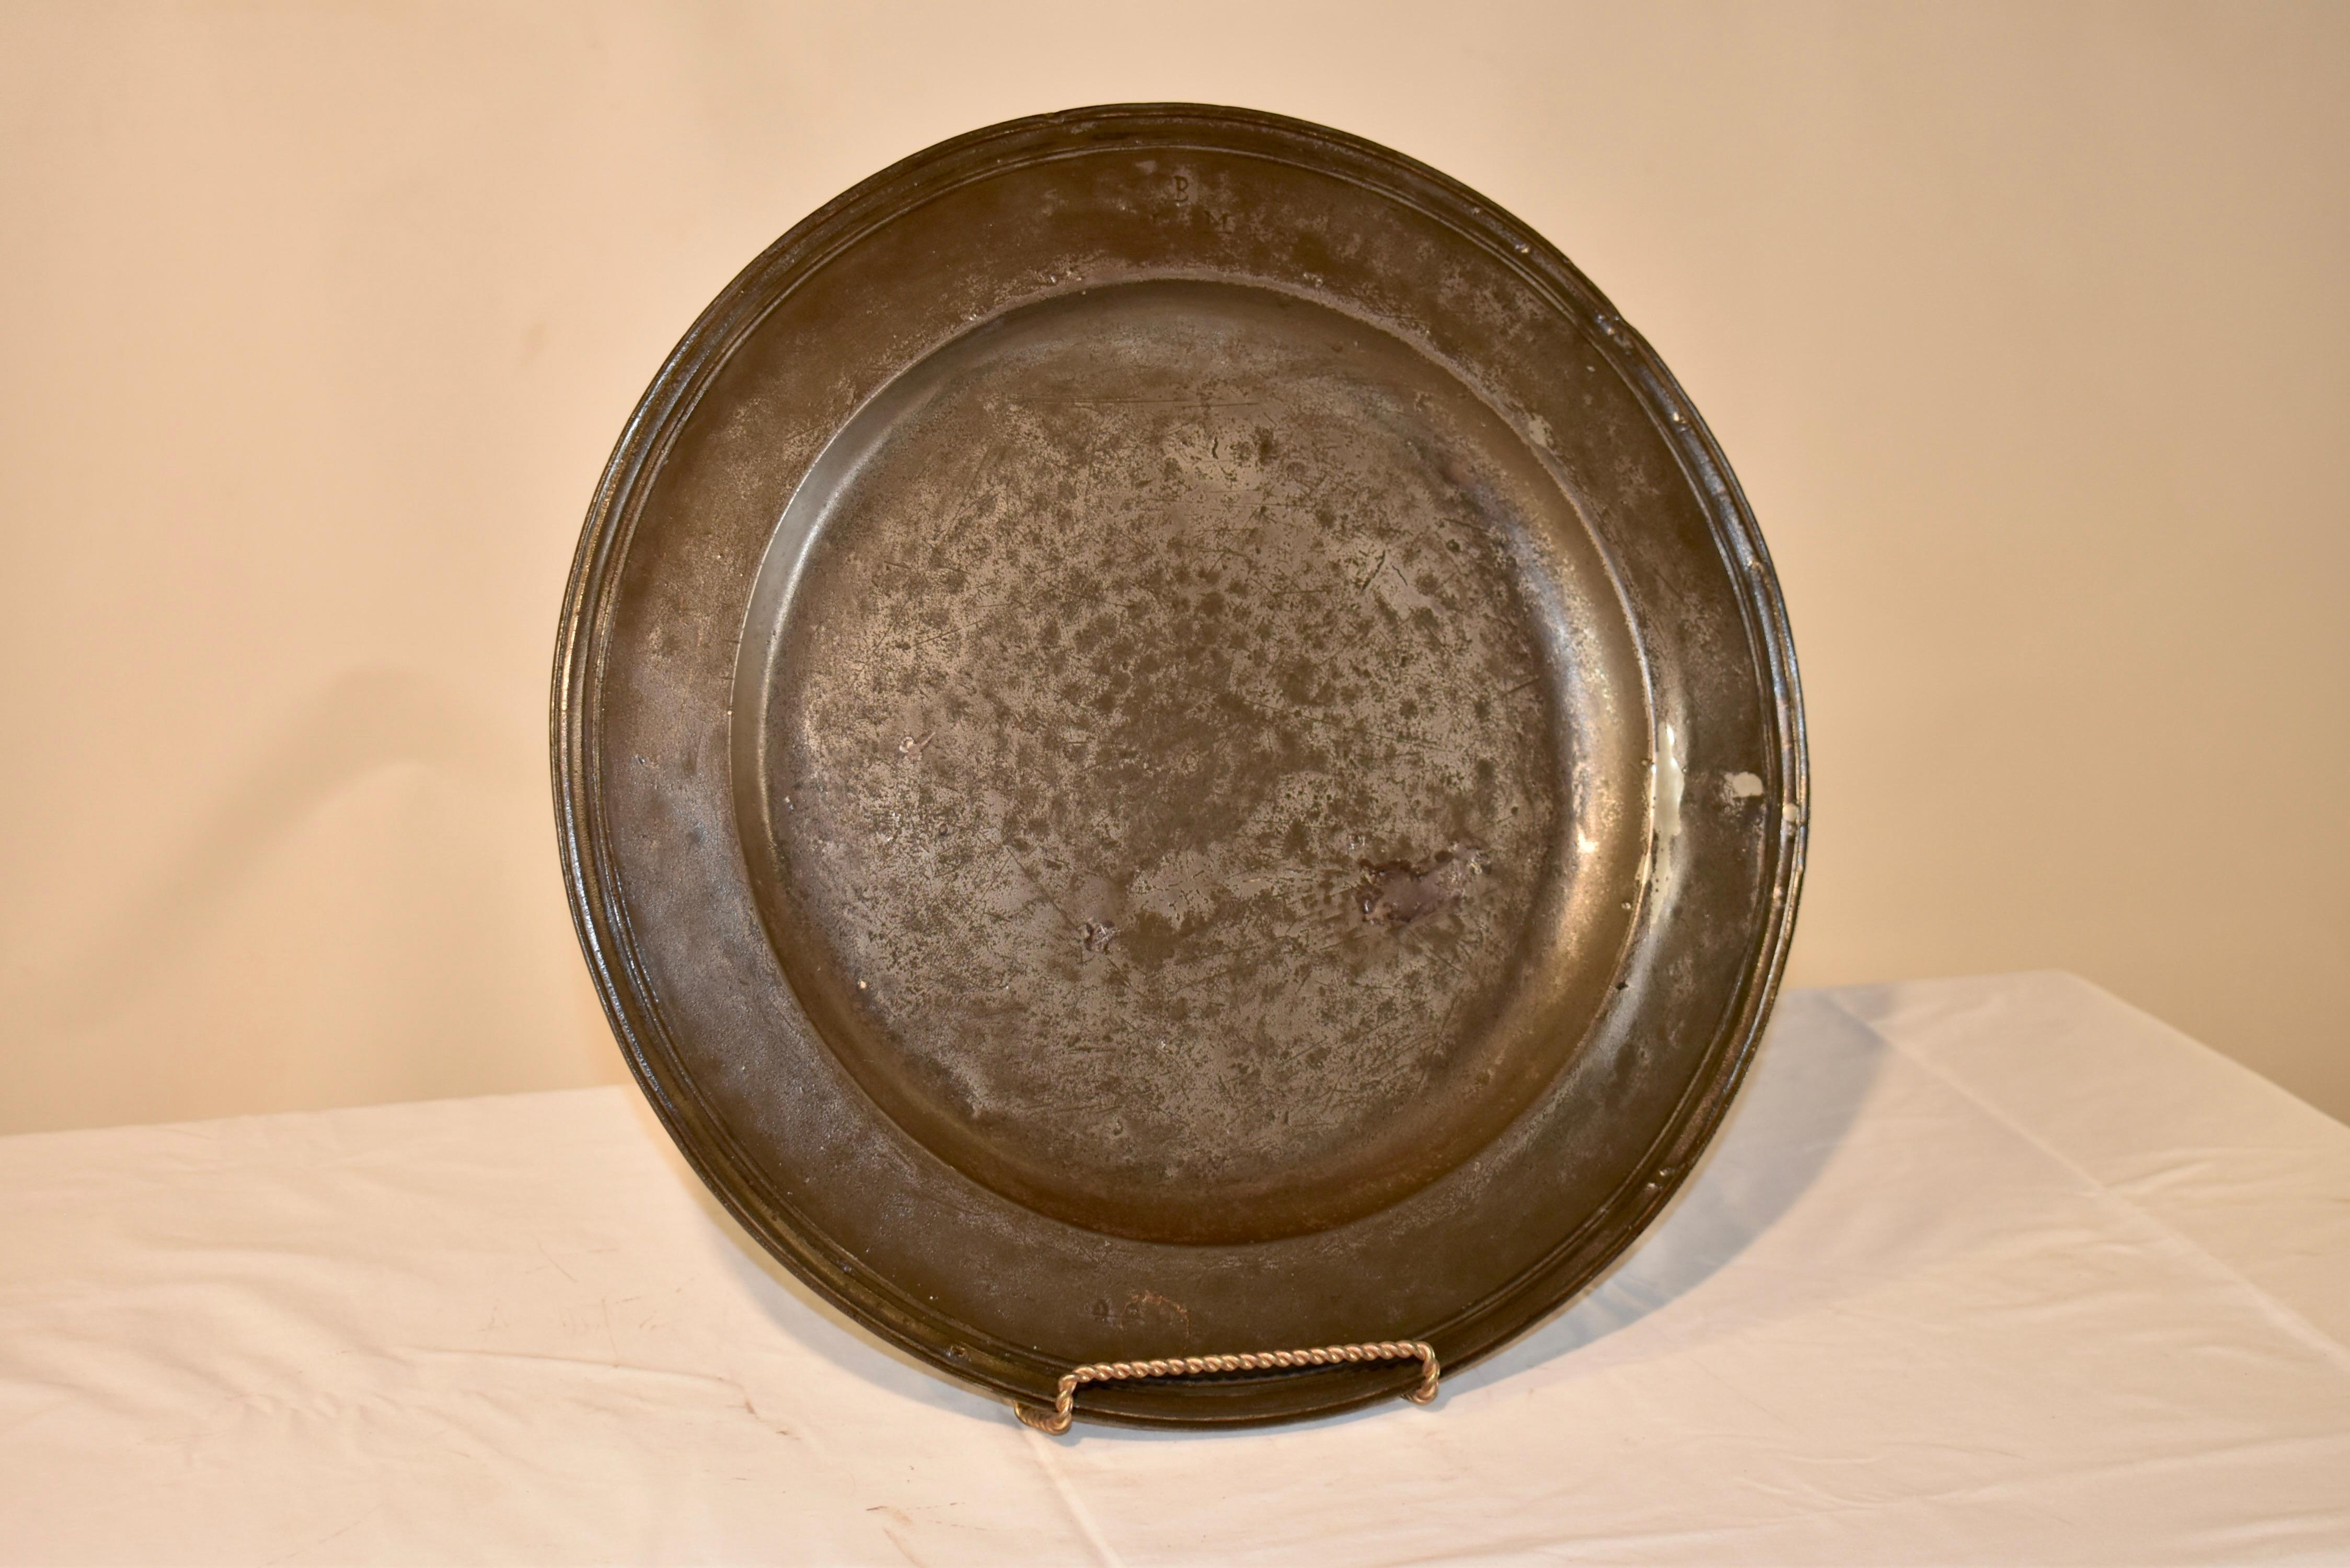 18th century large pewter charger with wide rim and molded edge, which is very elegant, especially for pewter, which was used more frequently for casual dining. there is a hallmark on the rim, which is photographed. Plate stand not included.